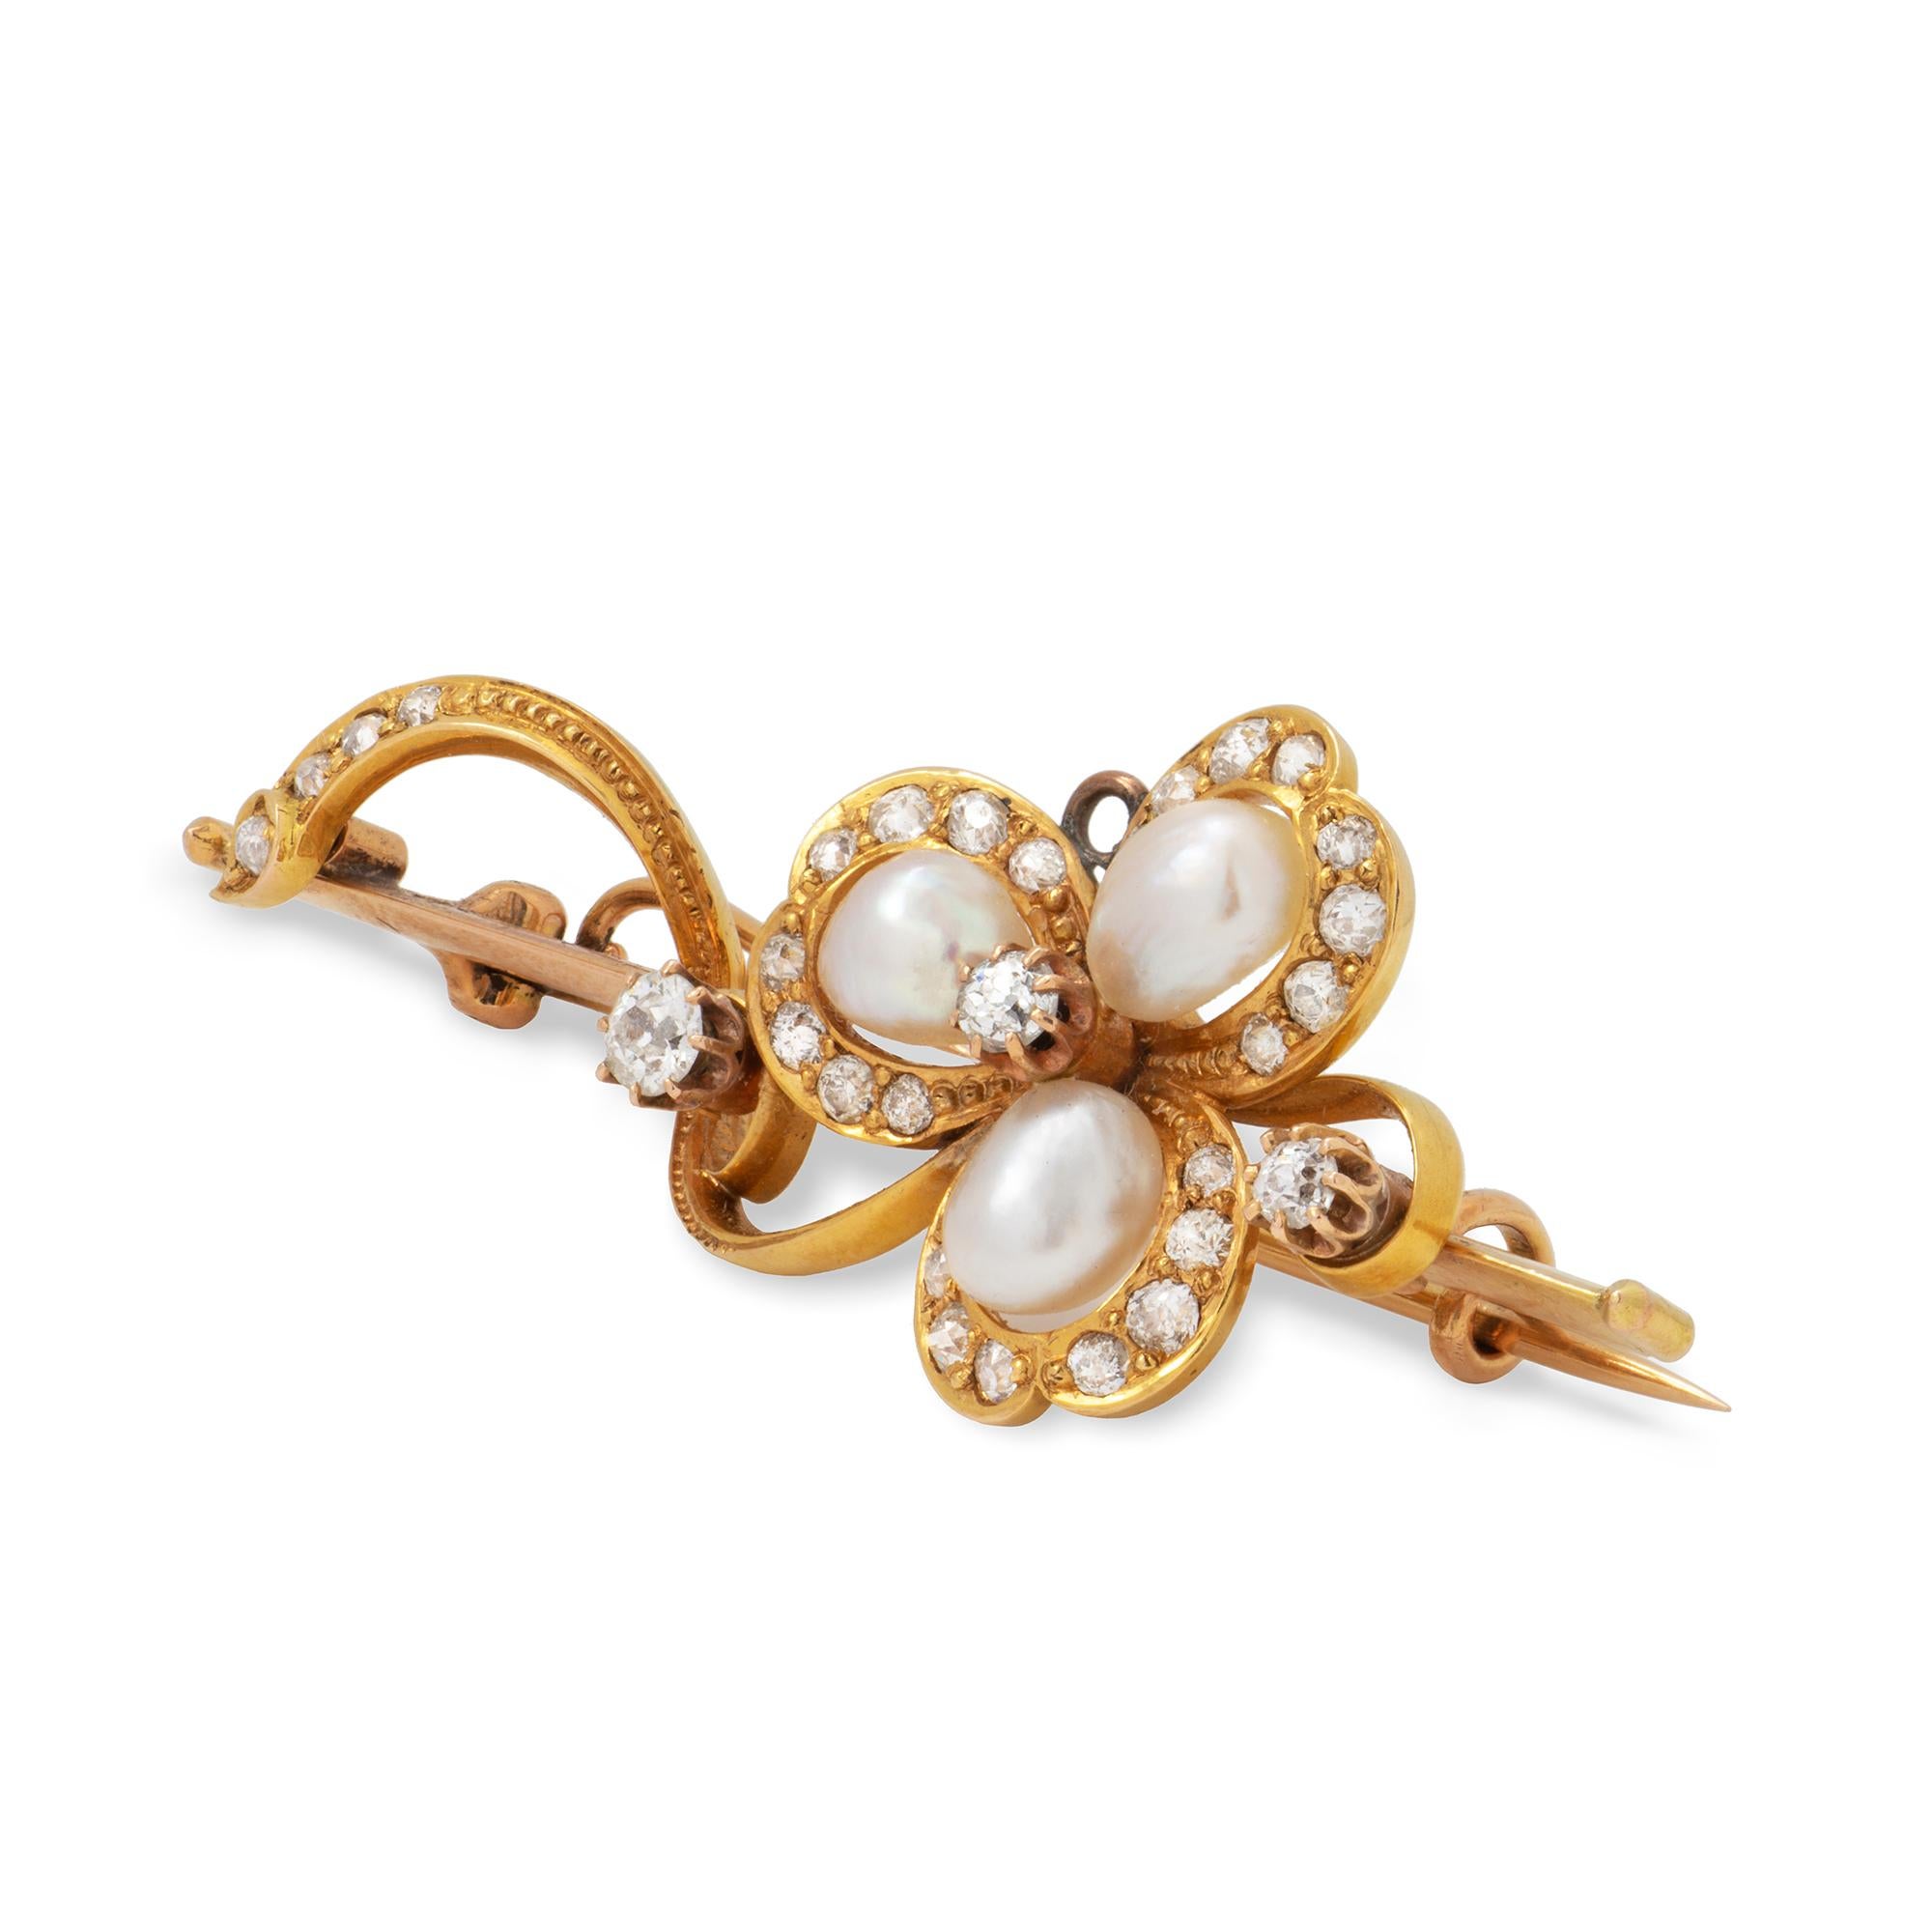 A Victorian pearl and diamond clover brooch, set with brilliant-cut diamond to the centre surrounded by three pearl set petals each within a diamond-set frame, to a stylized gold stem and further diamond decorations, measuring approximately 5.2 x